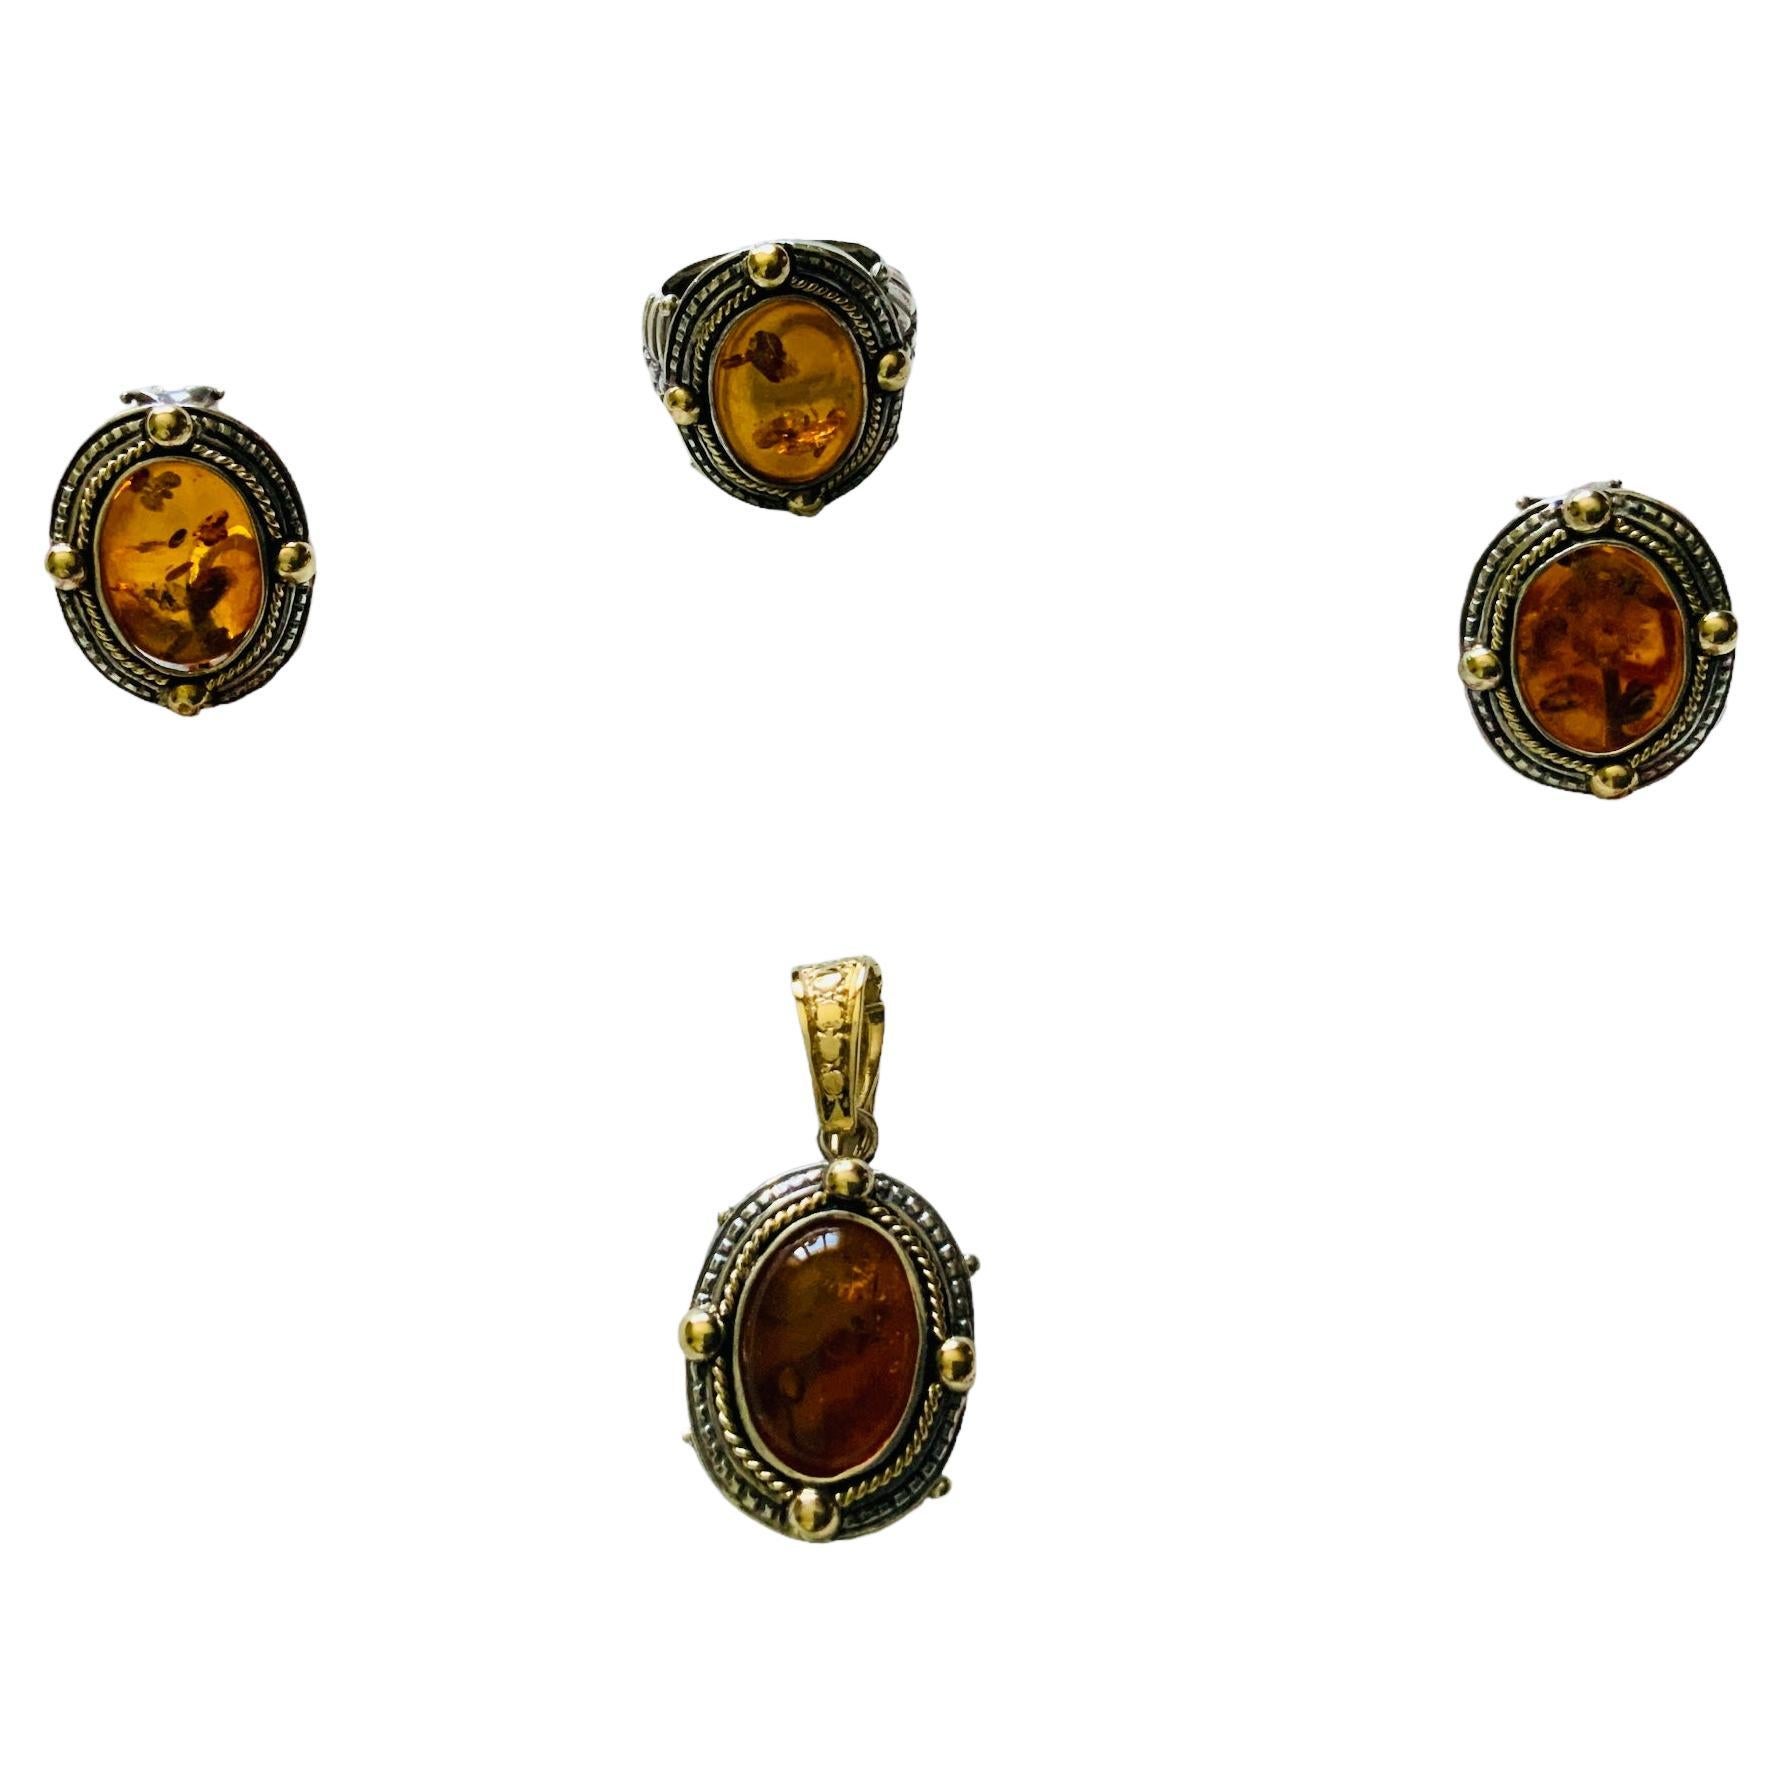 This is a set of 18K yellow gold, 925 silver and amber pair of earrings, pendant and ring. They depict an oval cabochon ambers on bezel setting decorated with an 18K gold thin ropes around them, followed by a carved 925 silver frames. Four 18K gold